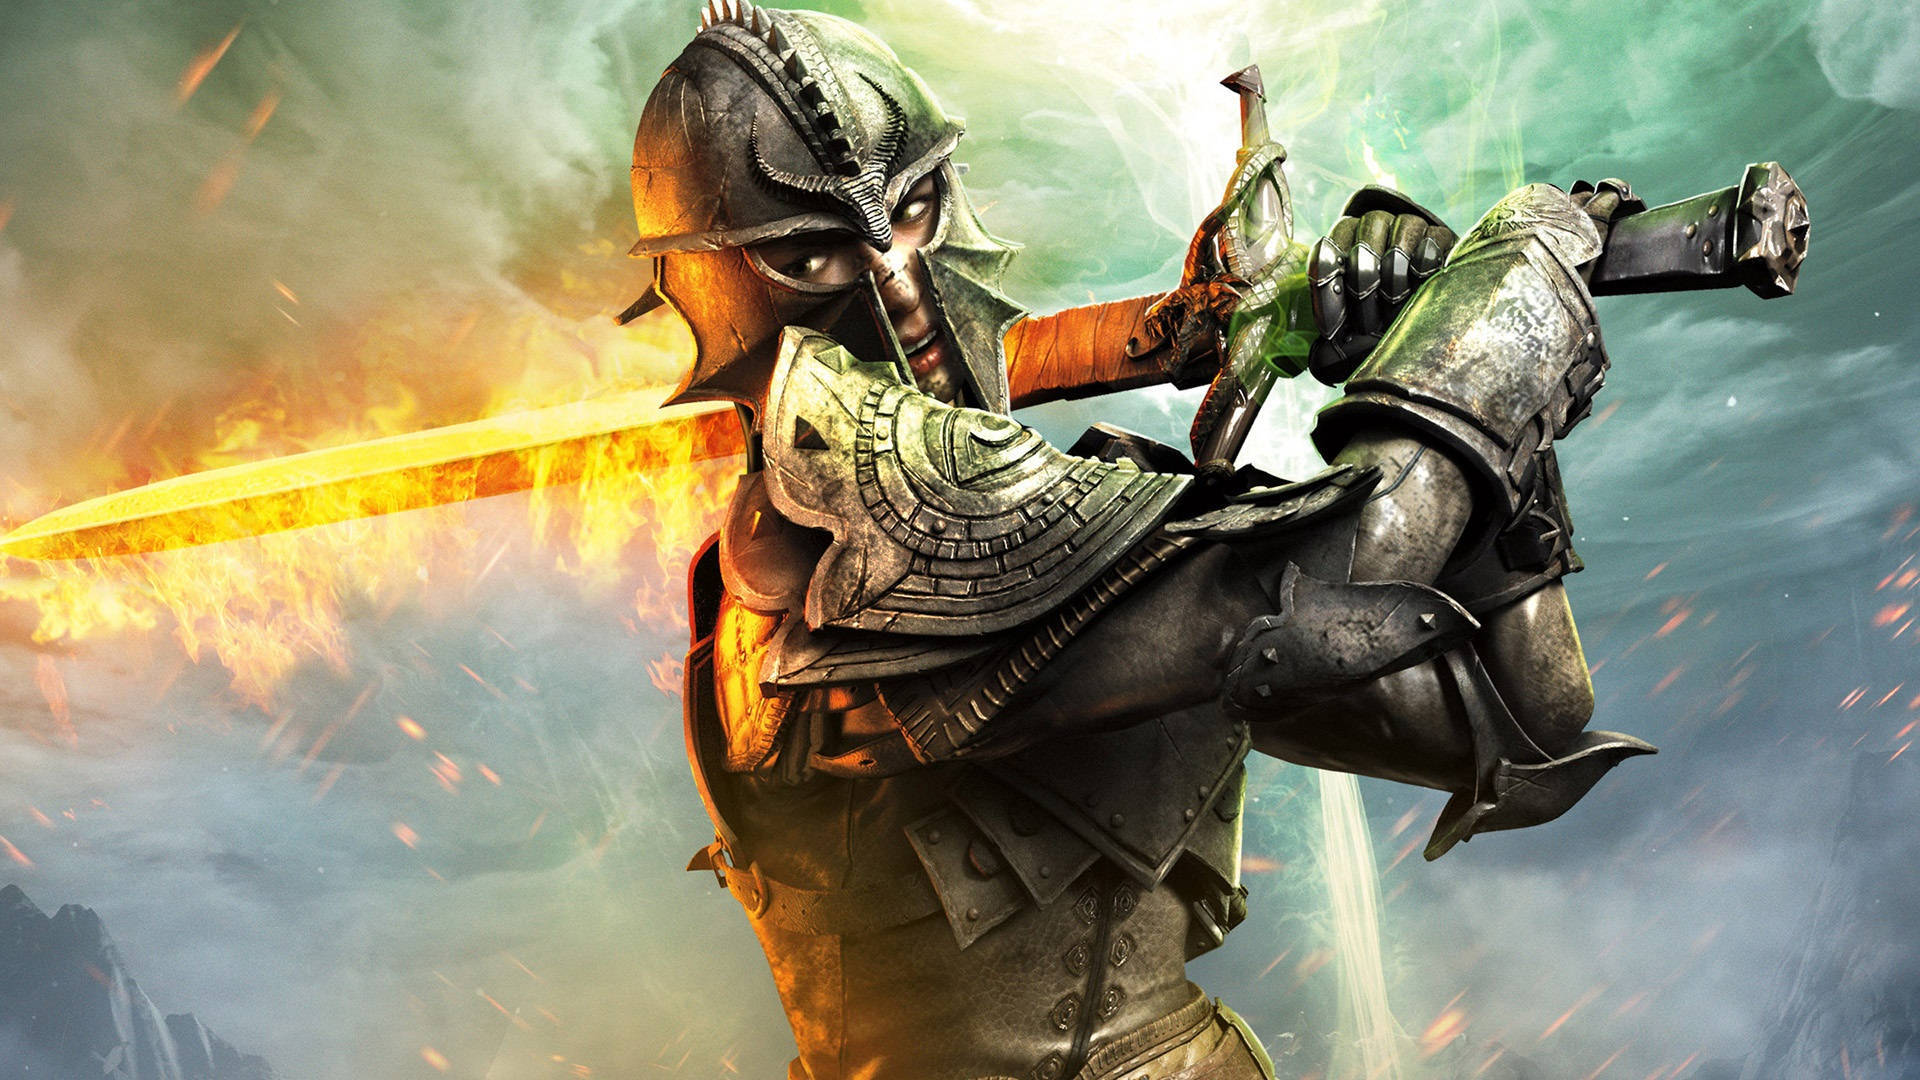 Dragon Age Inquisition Video Game Series The Inquisitor Wallpaper